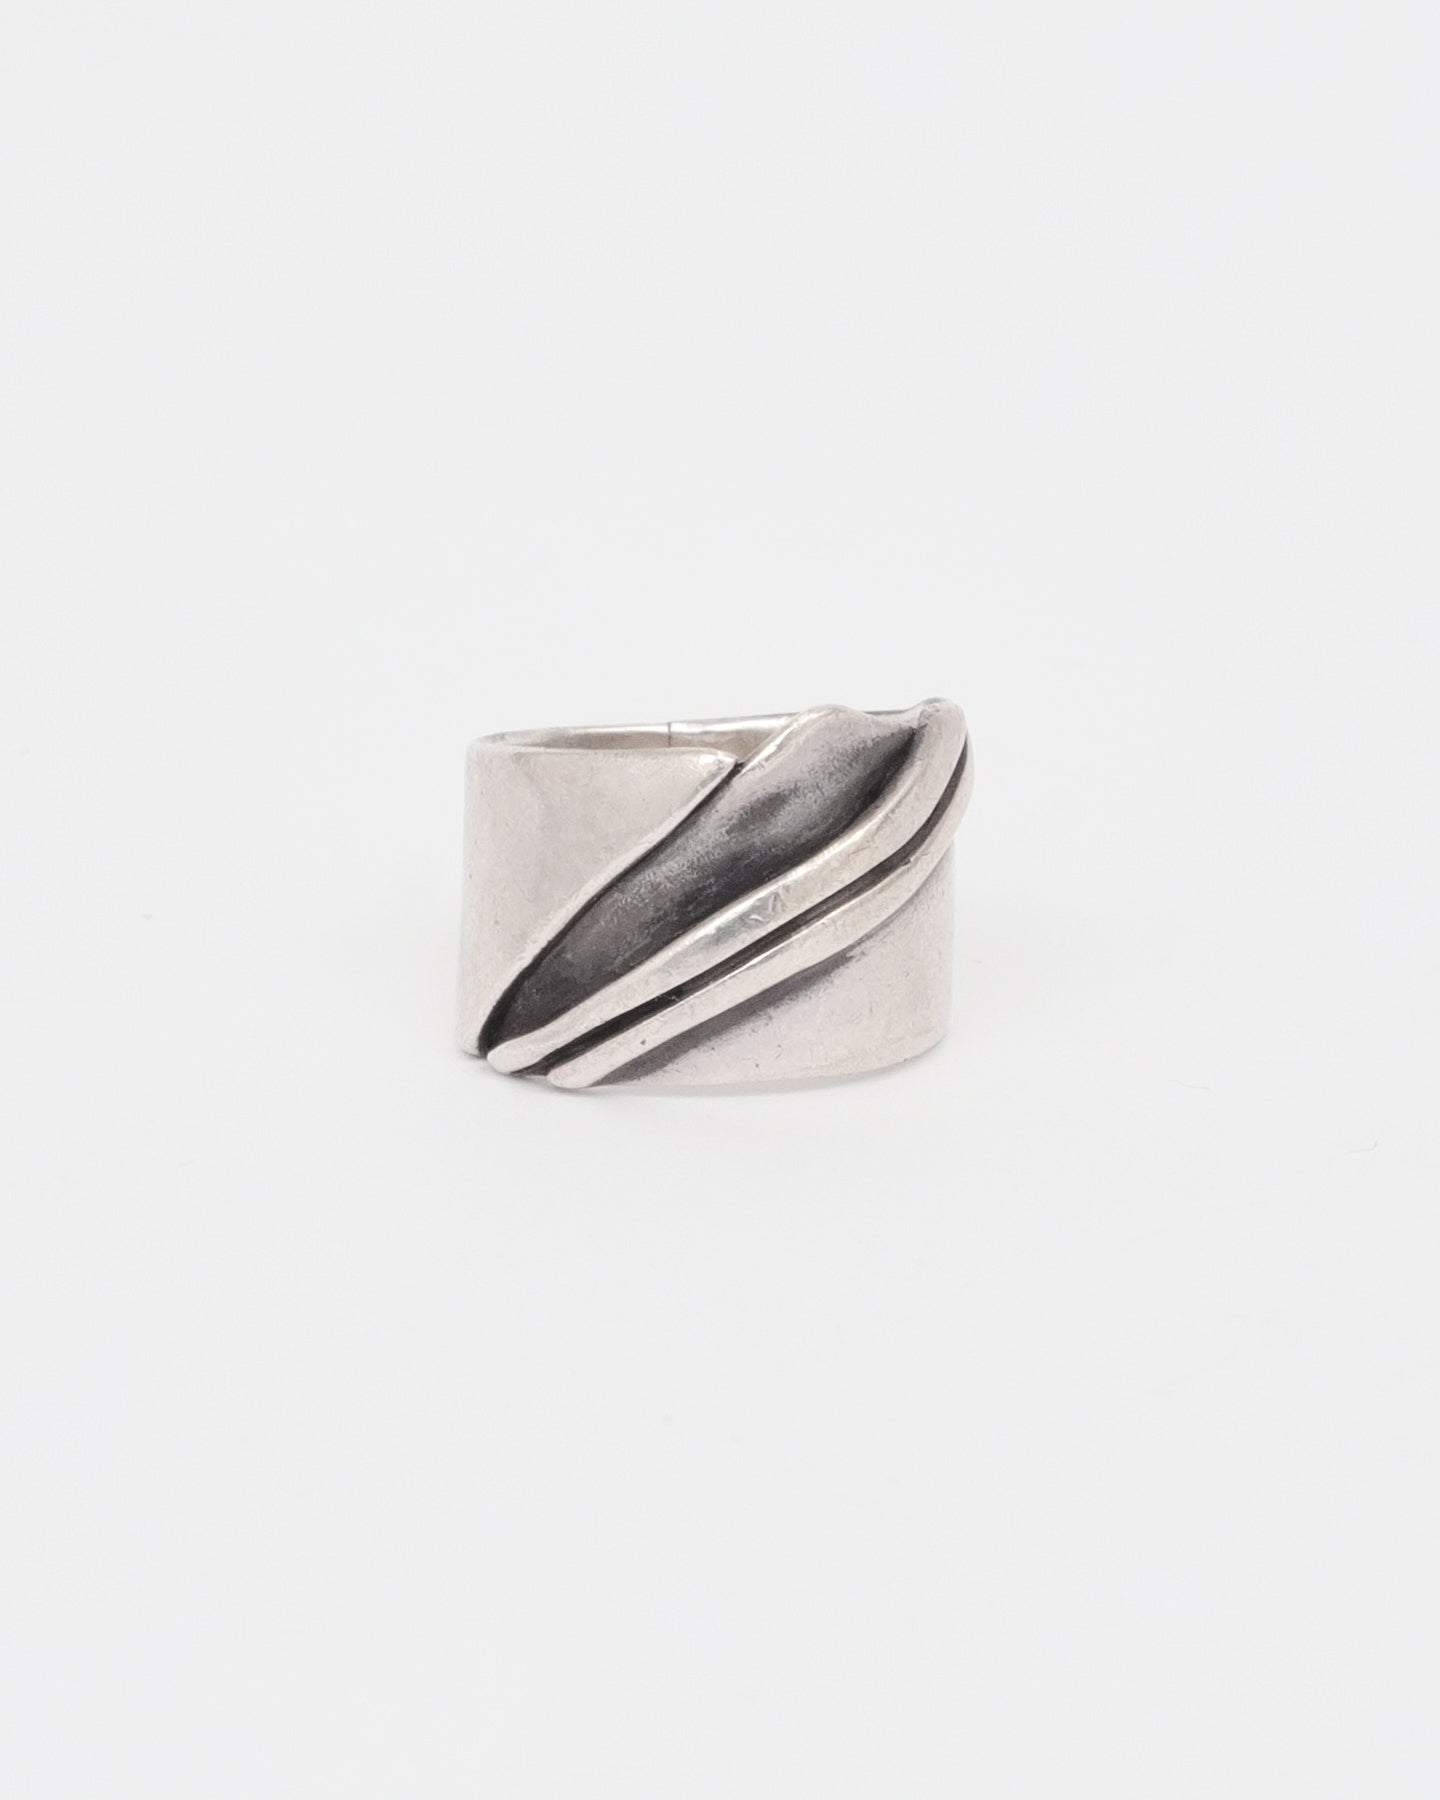 Silver Ring: Size13